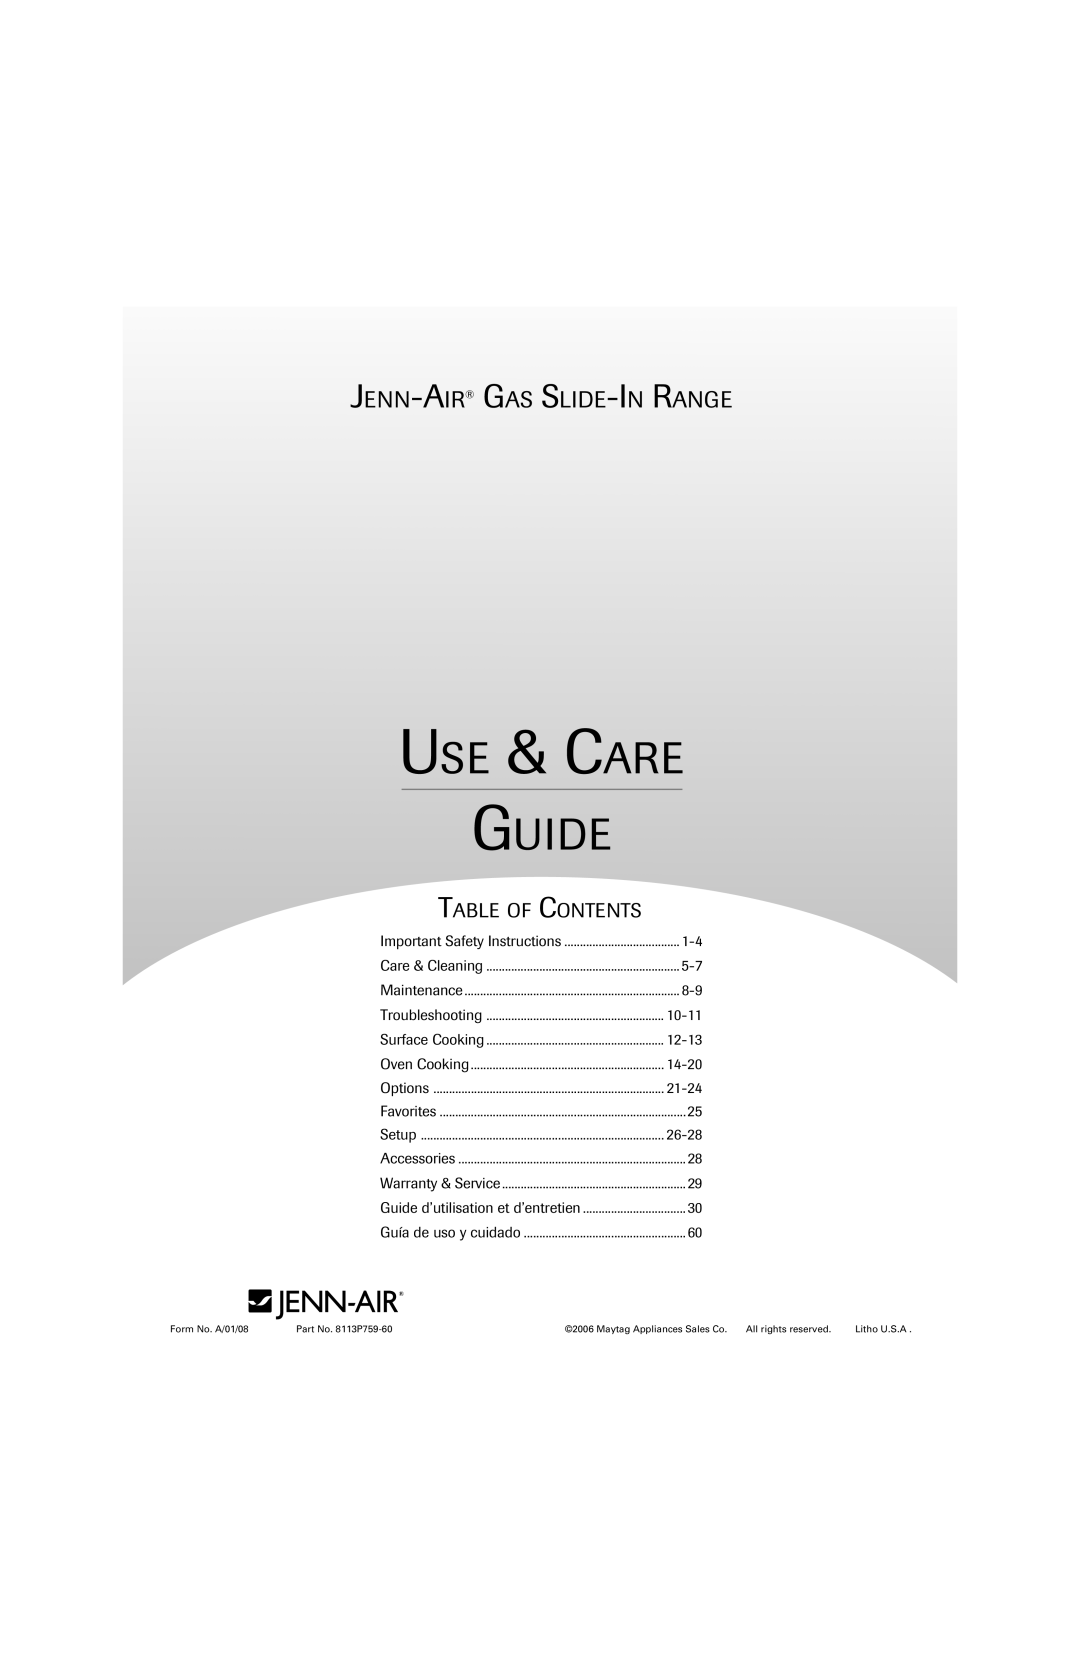 Jenn-Air 8113P759-60 important safety instructions Use & Care Guide, Jenn-Air Gas Slide-In Range, Table Of Contents 